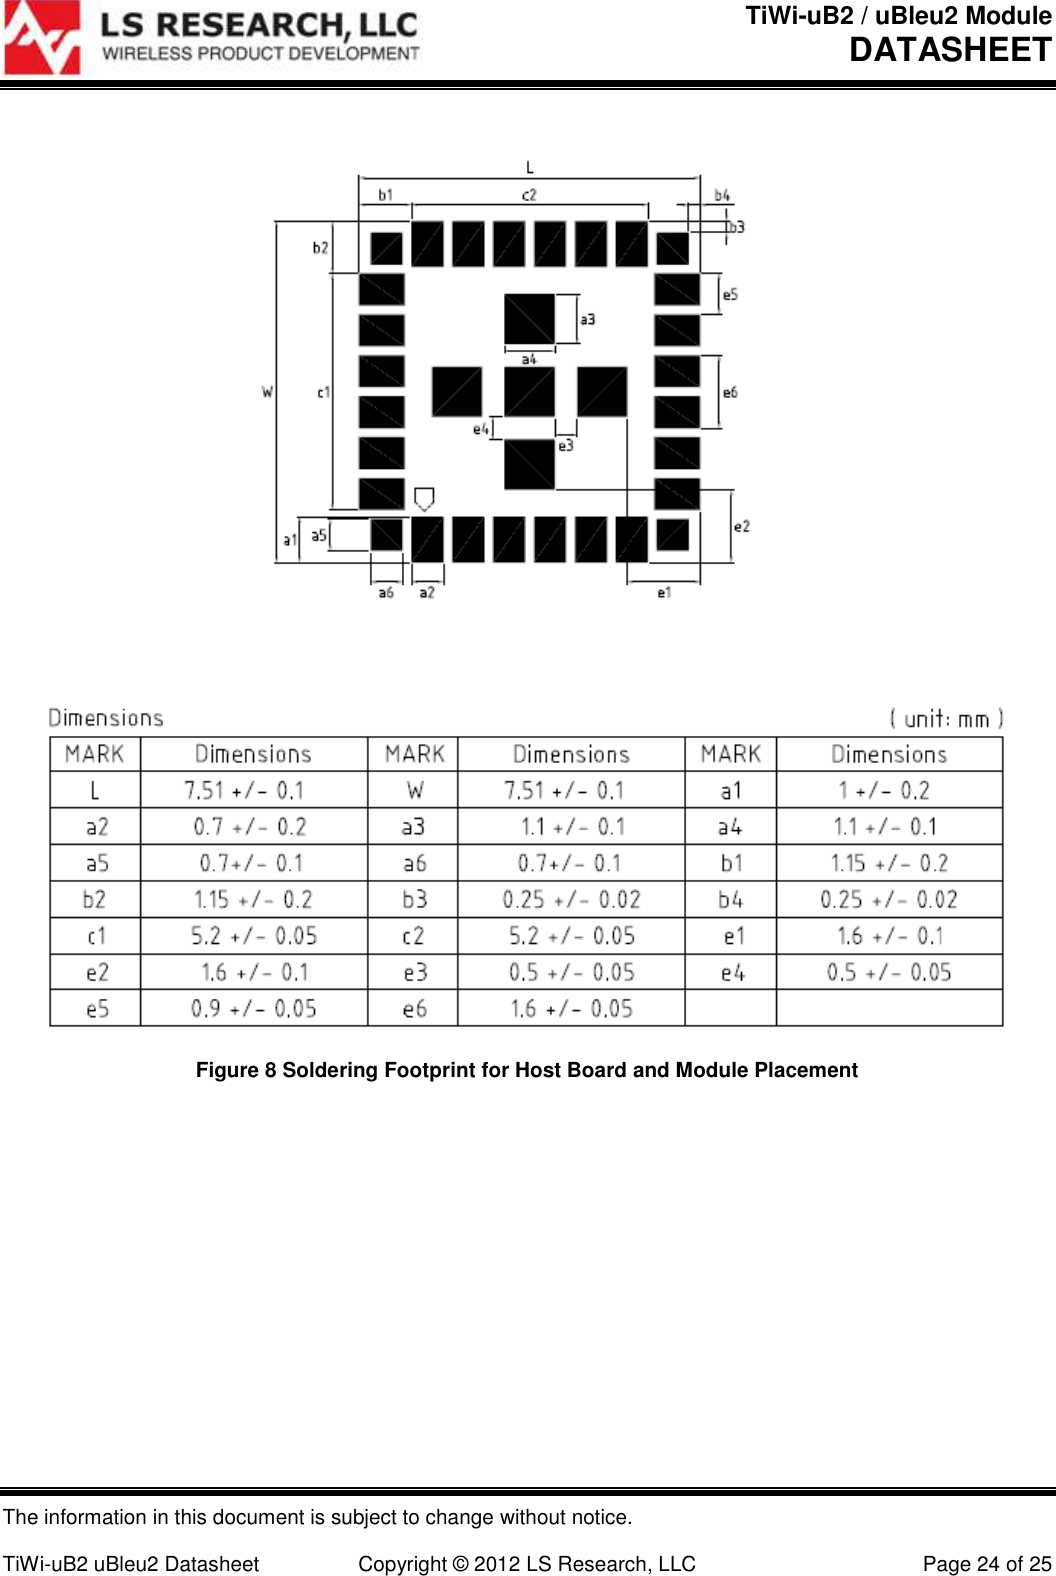 TiWi-uB2 / uBleu2 Module DATASHEET  The information in this document is subject to change without notice.  TiWi-uB2 uBleu2 Datasheet  Copyright © 2012 LS Research, LLC  Page 24 of 25                   Figure 8 Soldering Footprint for Host Board and Module Placement     